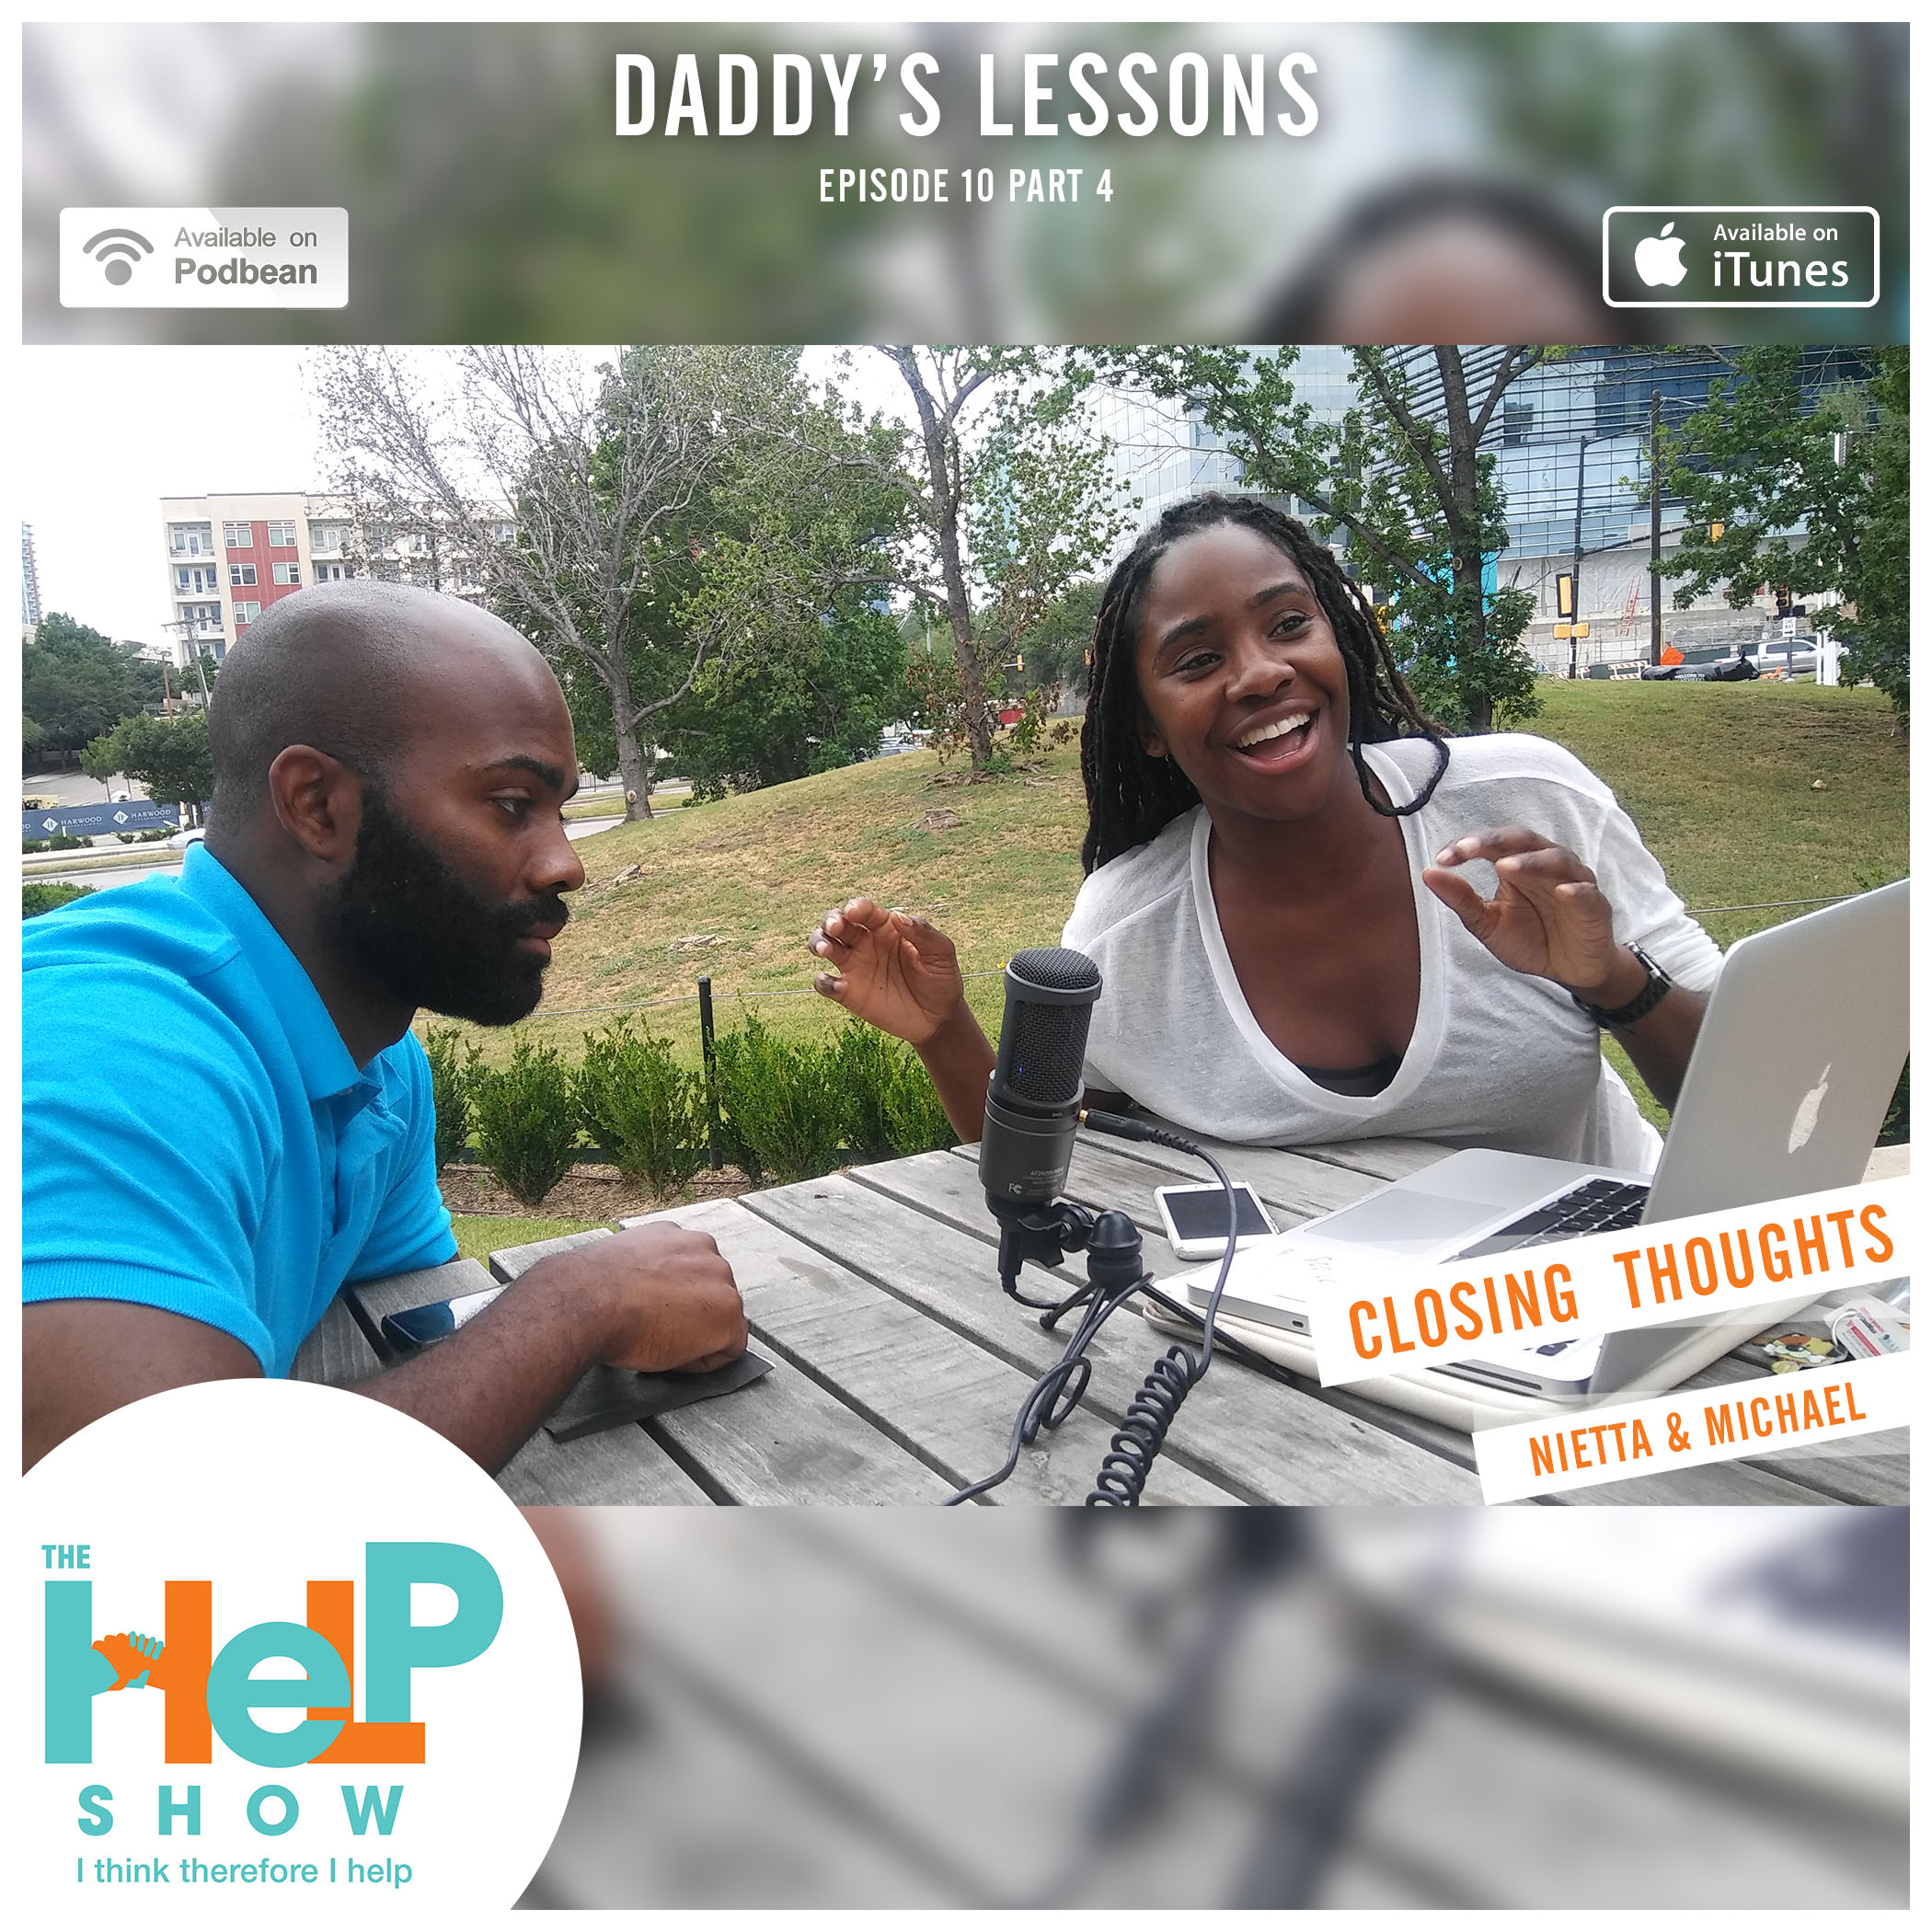 Daddy's Lessons (Episode 10: Part4) Closing Thoughts with Michael & Nietta